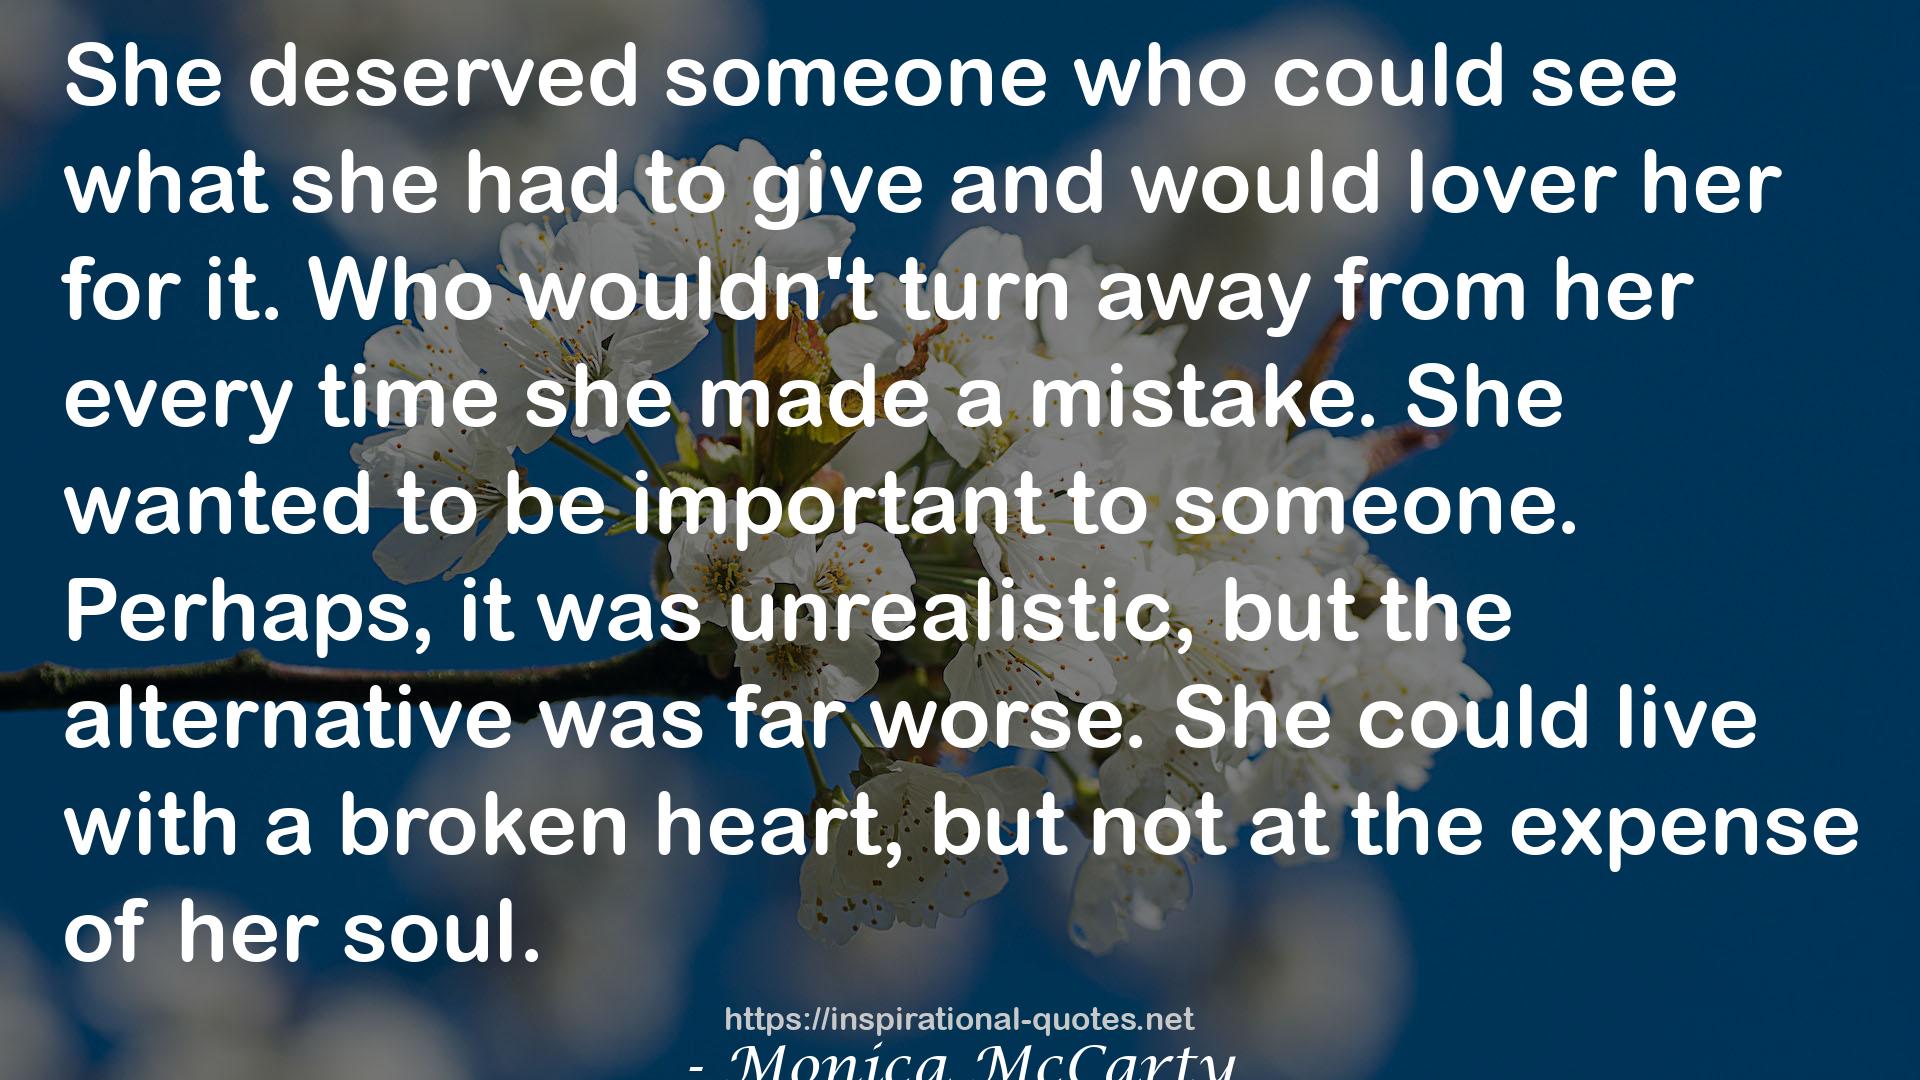 Monica McCarty QUOTES